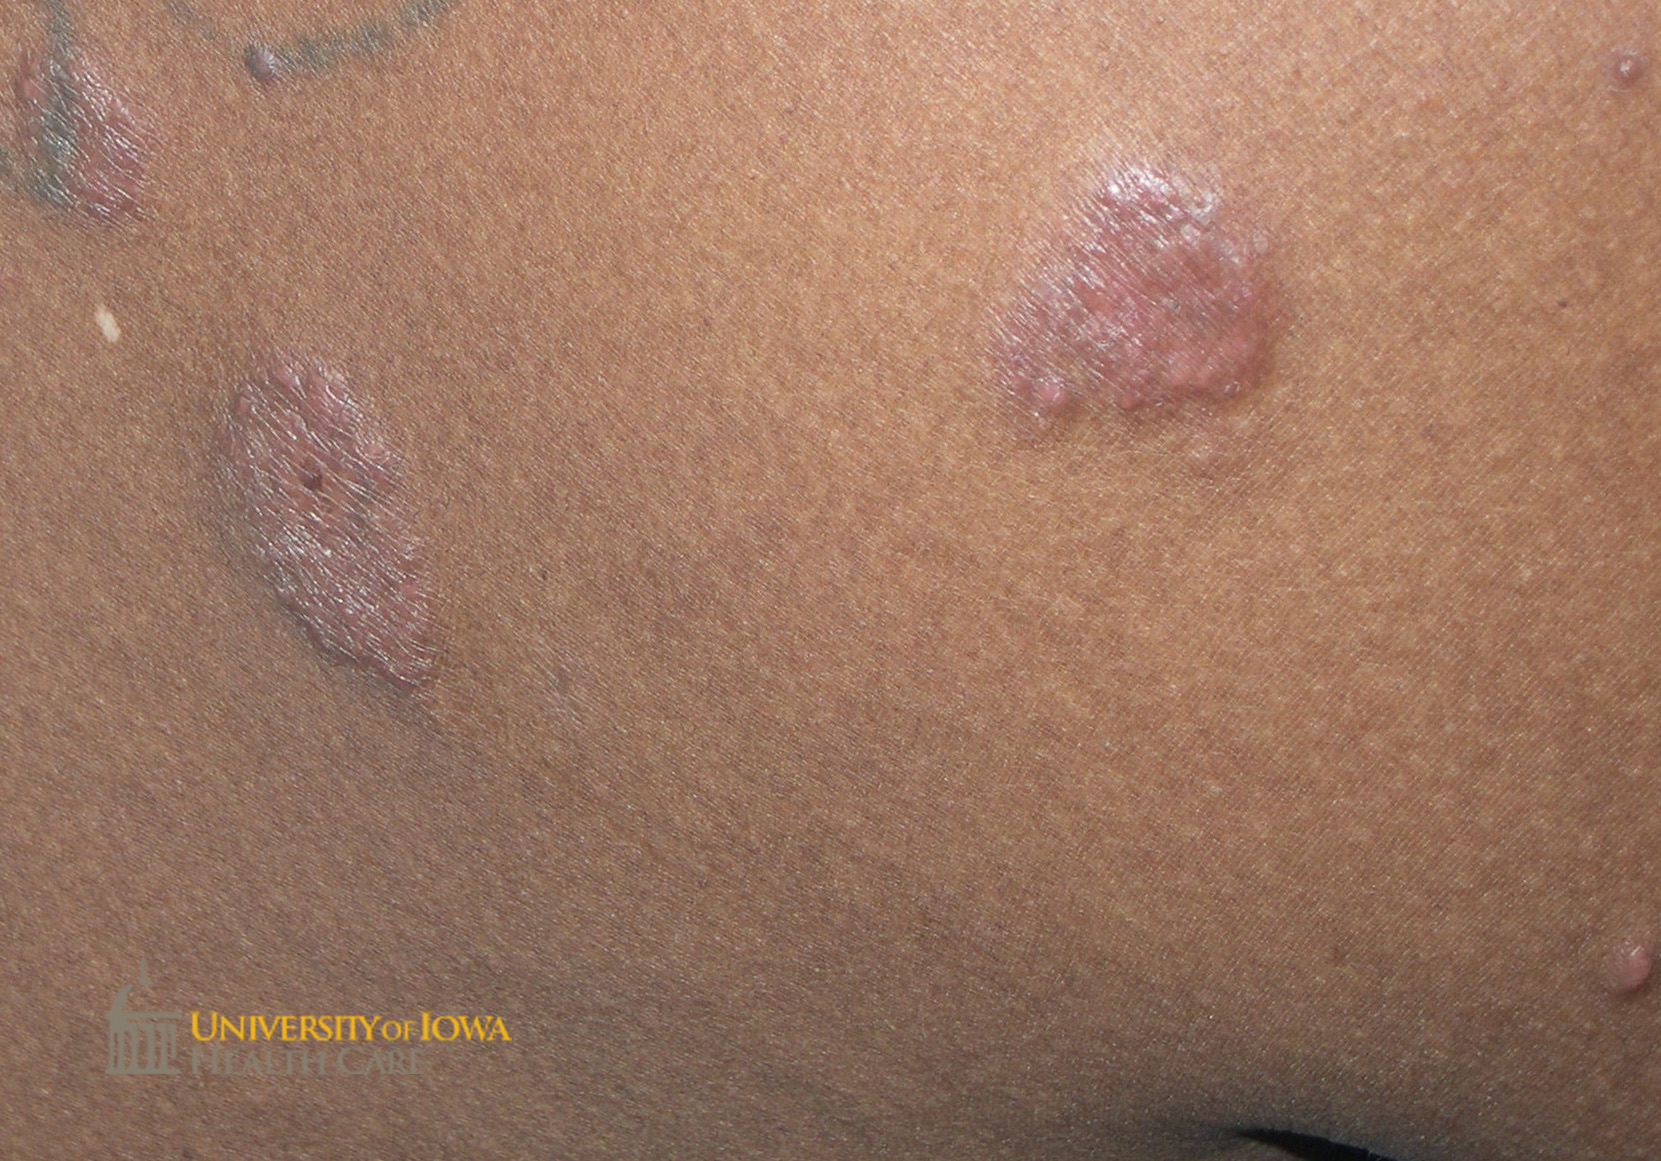 Annular pink plaques and papules on the back. (click images for higher resolution).